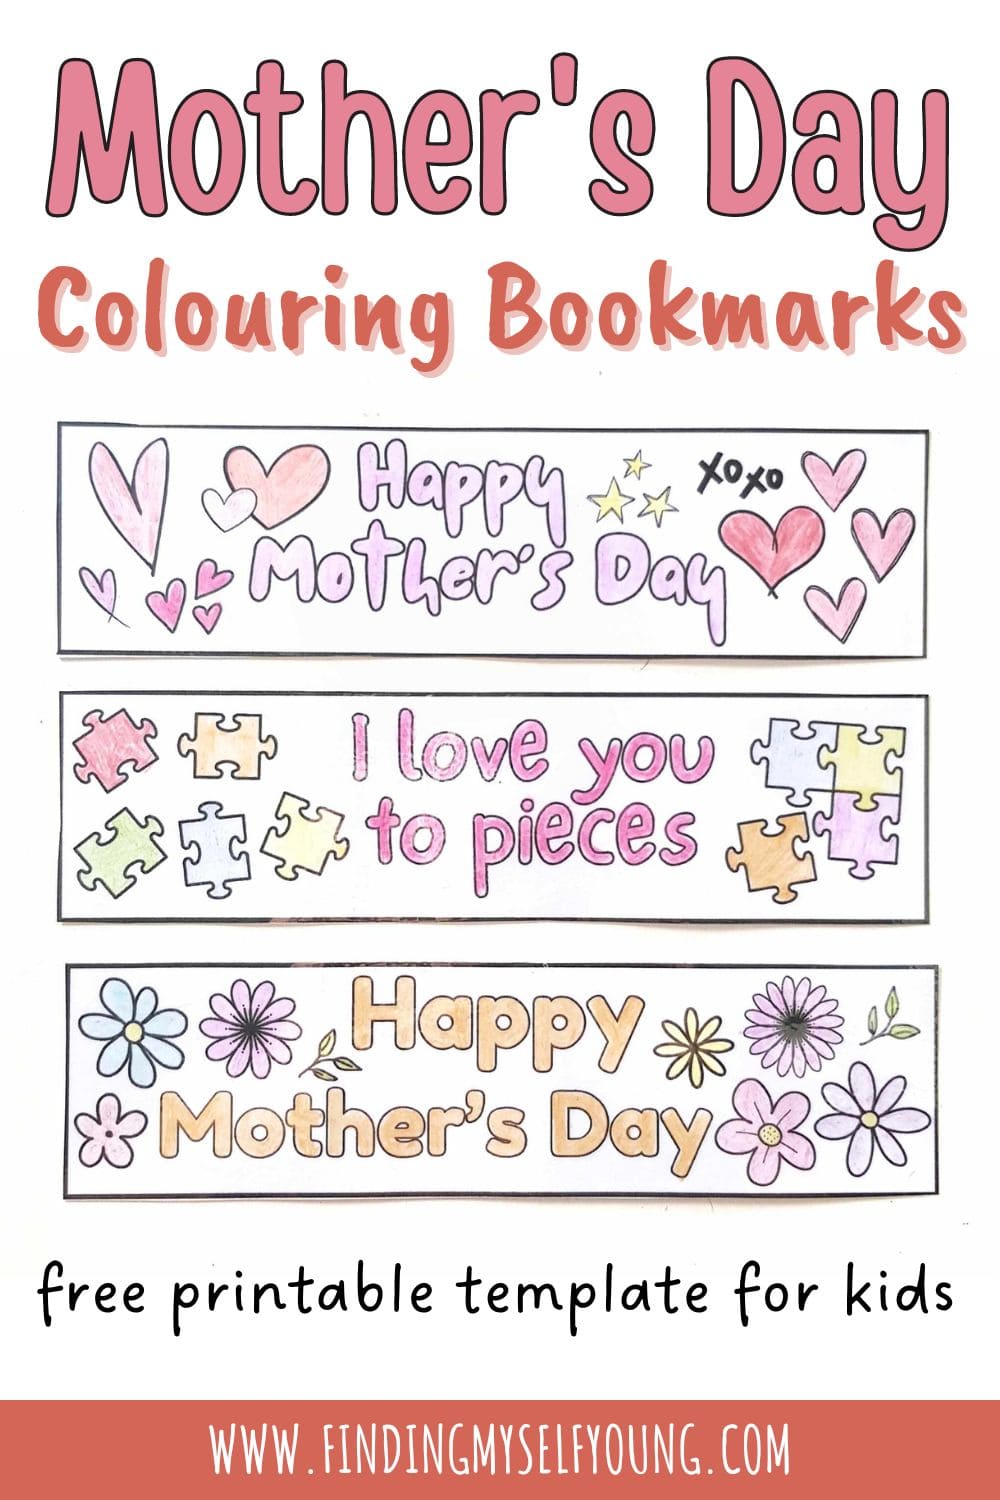 Free printable Mother's Day colouring bookmarks templates for kids.